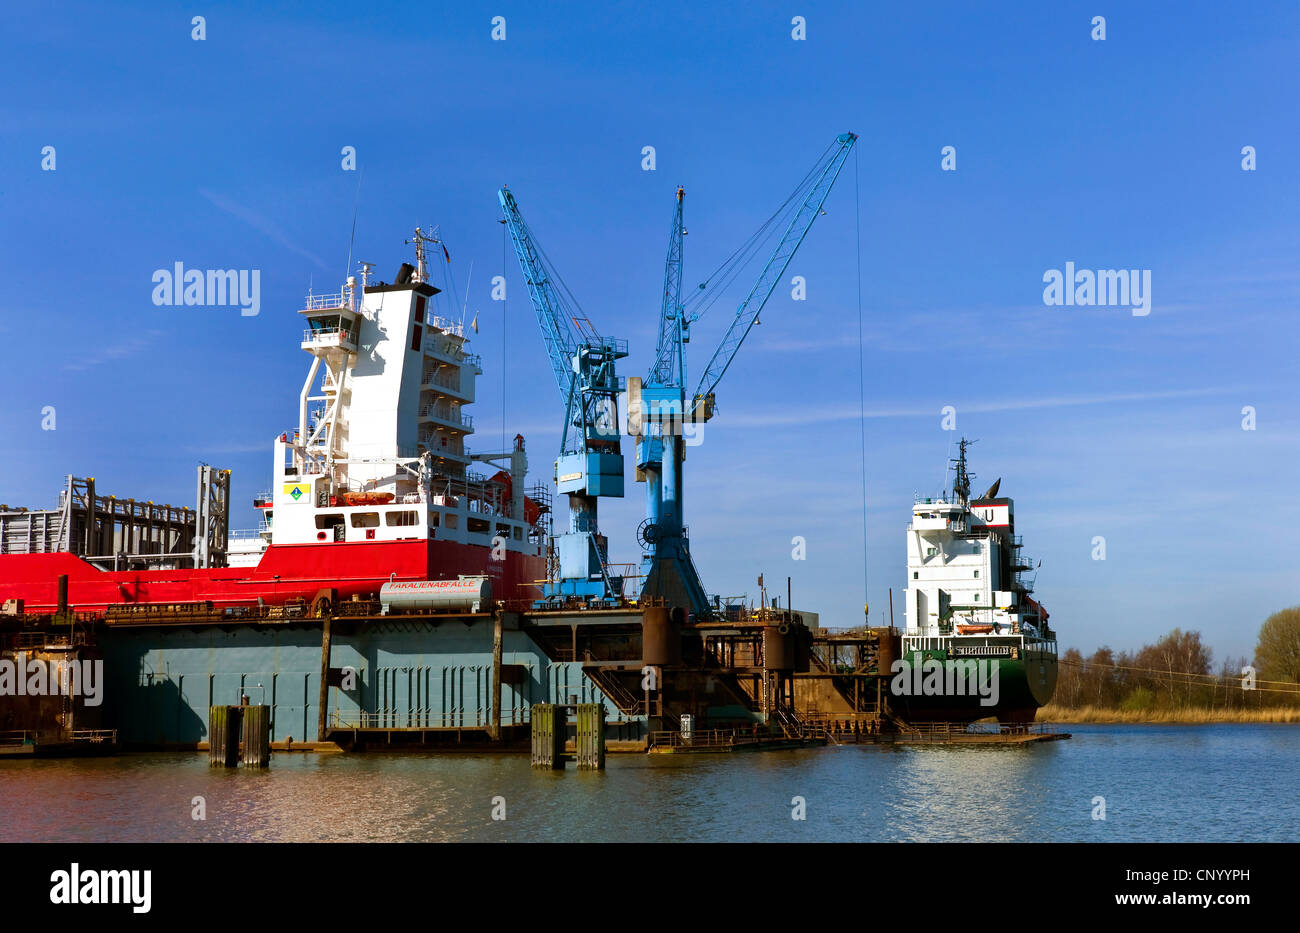 ships in the floating dock on river Weser, Germany, Bremerhaven Stock Photo